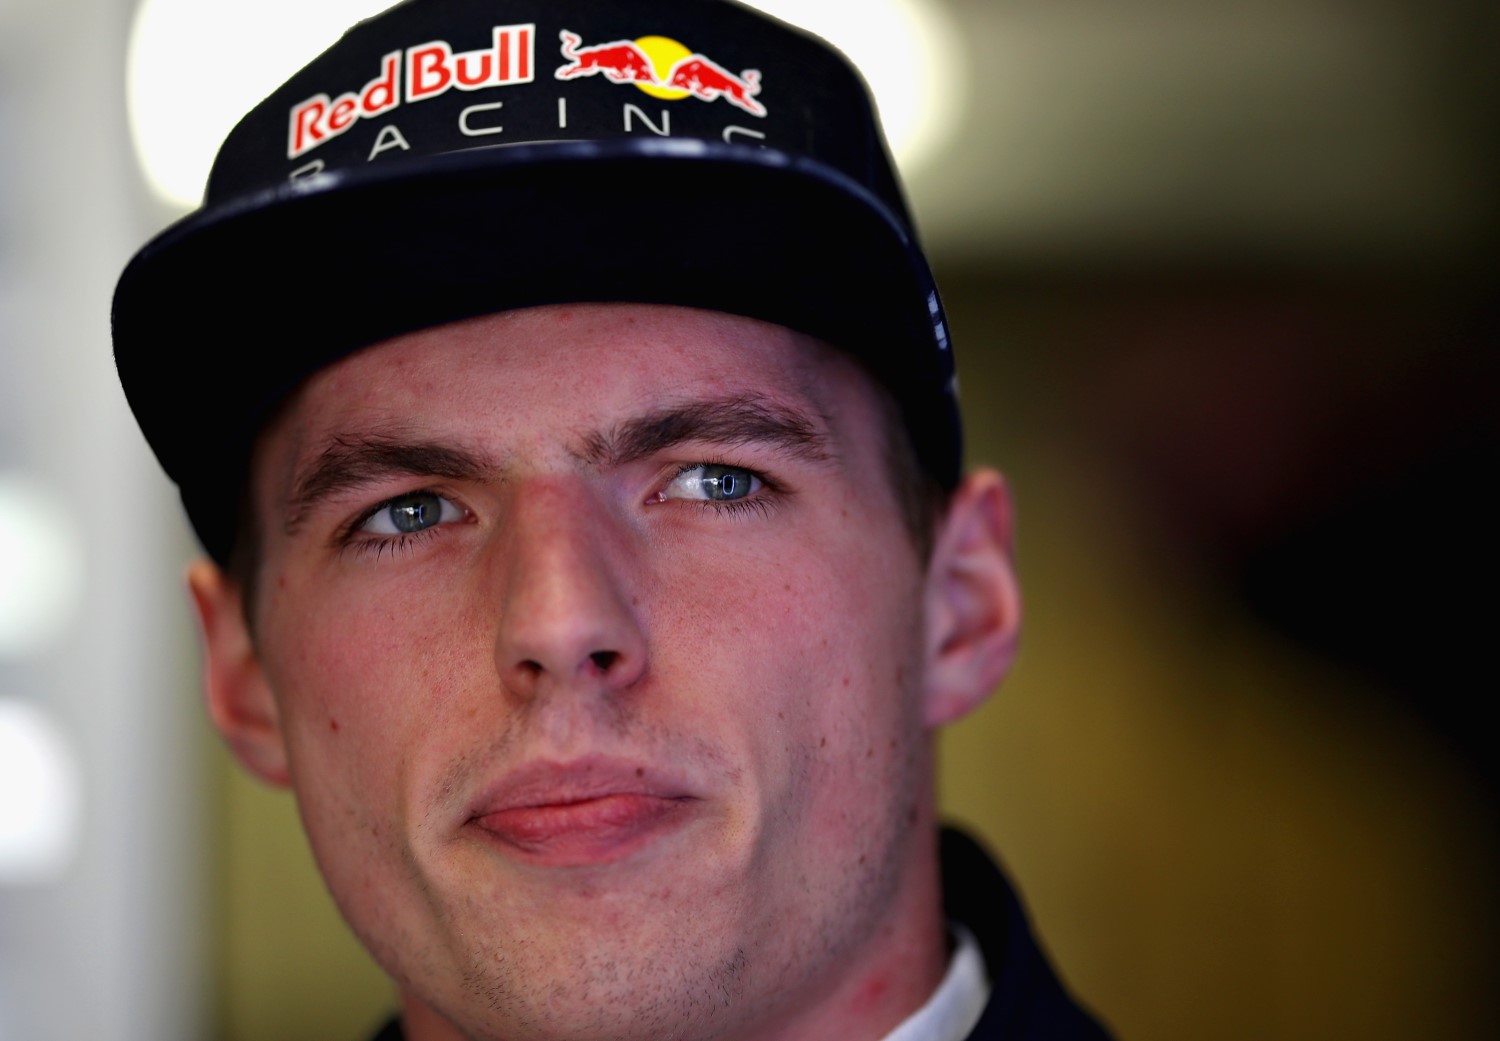 Max Verstappen knows that Renault had to sacrifice reliability in an effort to catch Mercedes in HP